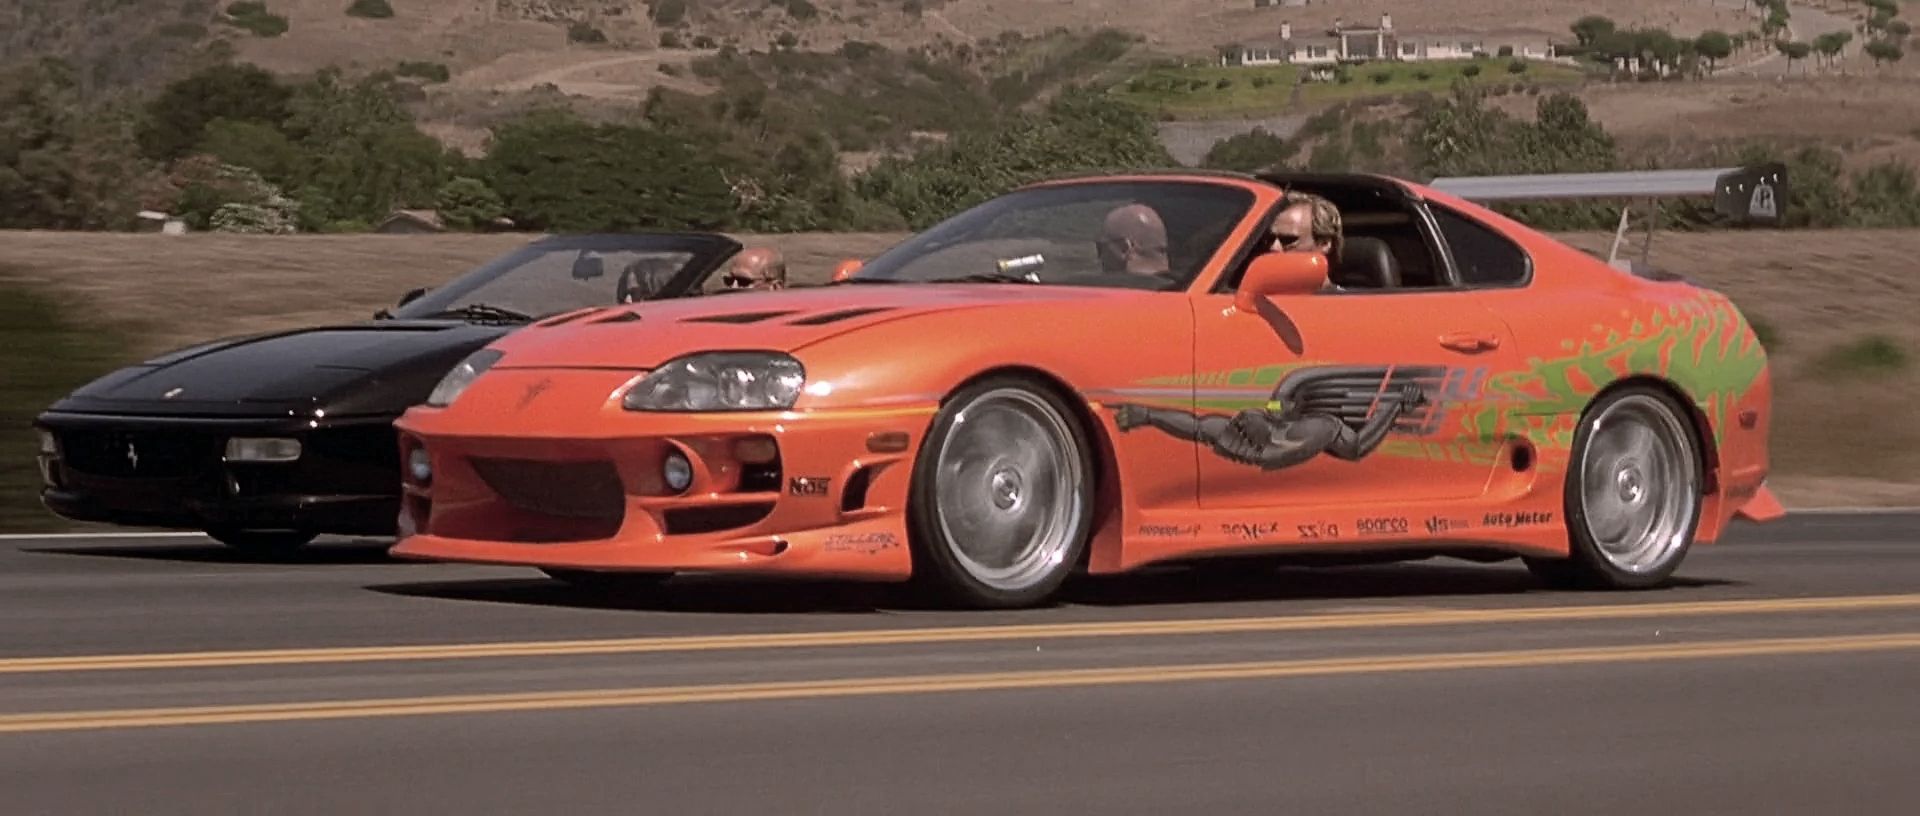 The Fast and the Furious Toyota Supra MKIV 1